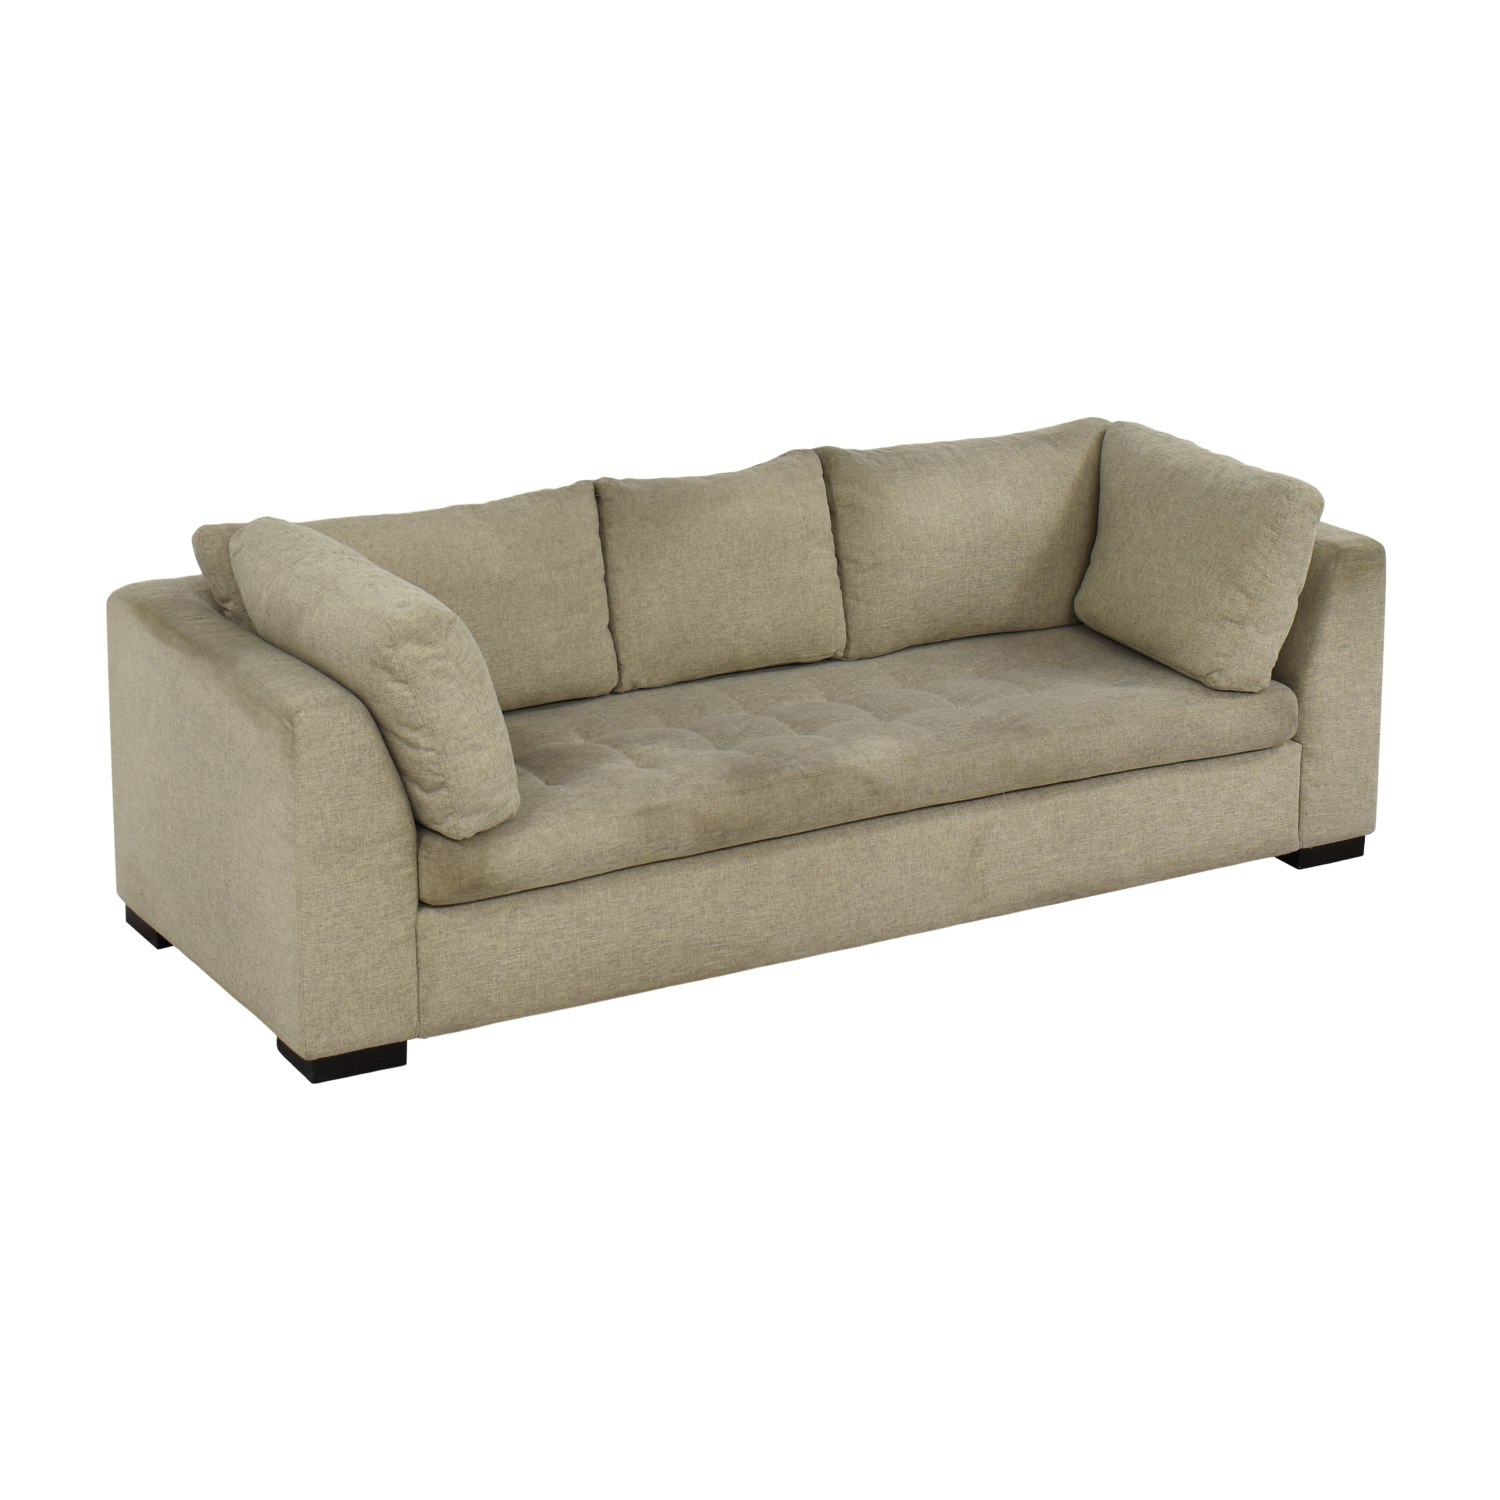 American Leather American Leather Modern Bench-Seat Sofa  price